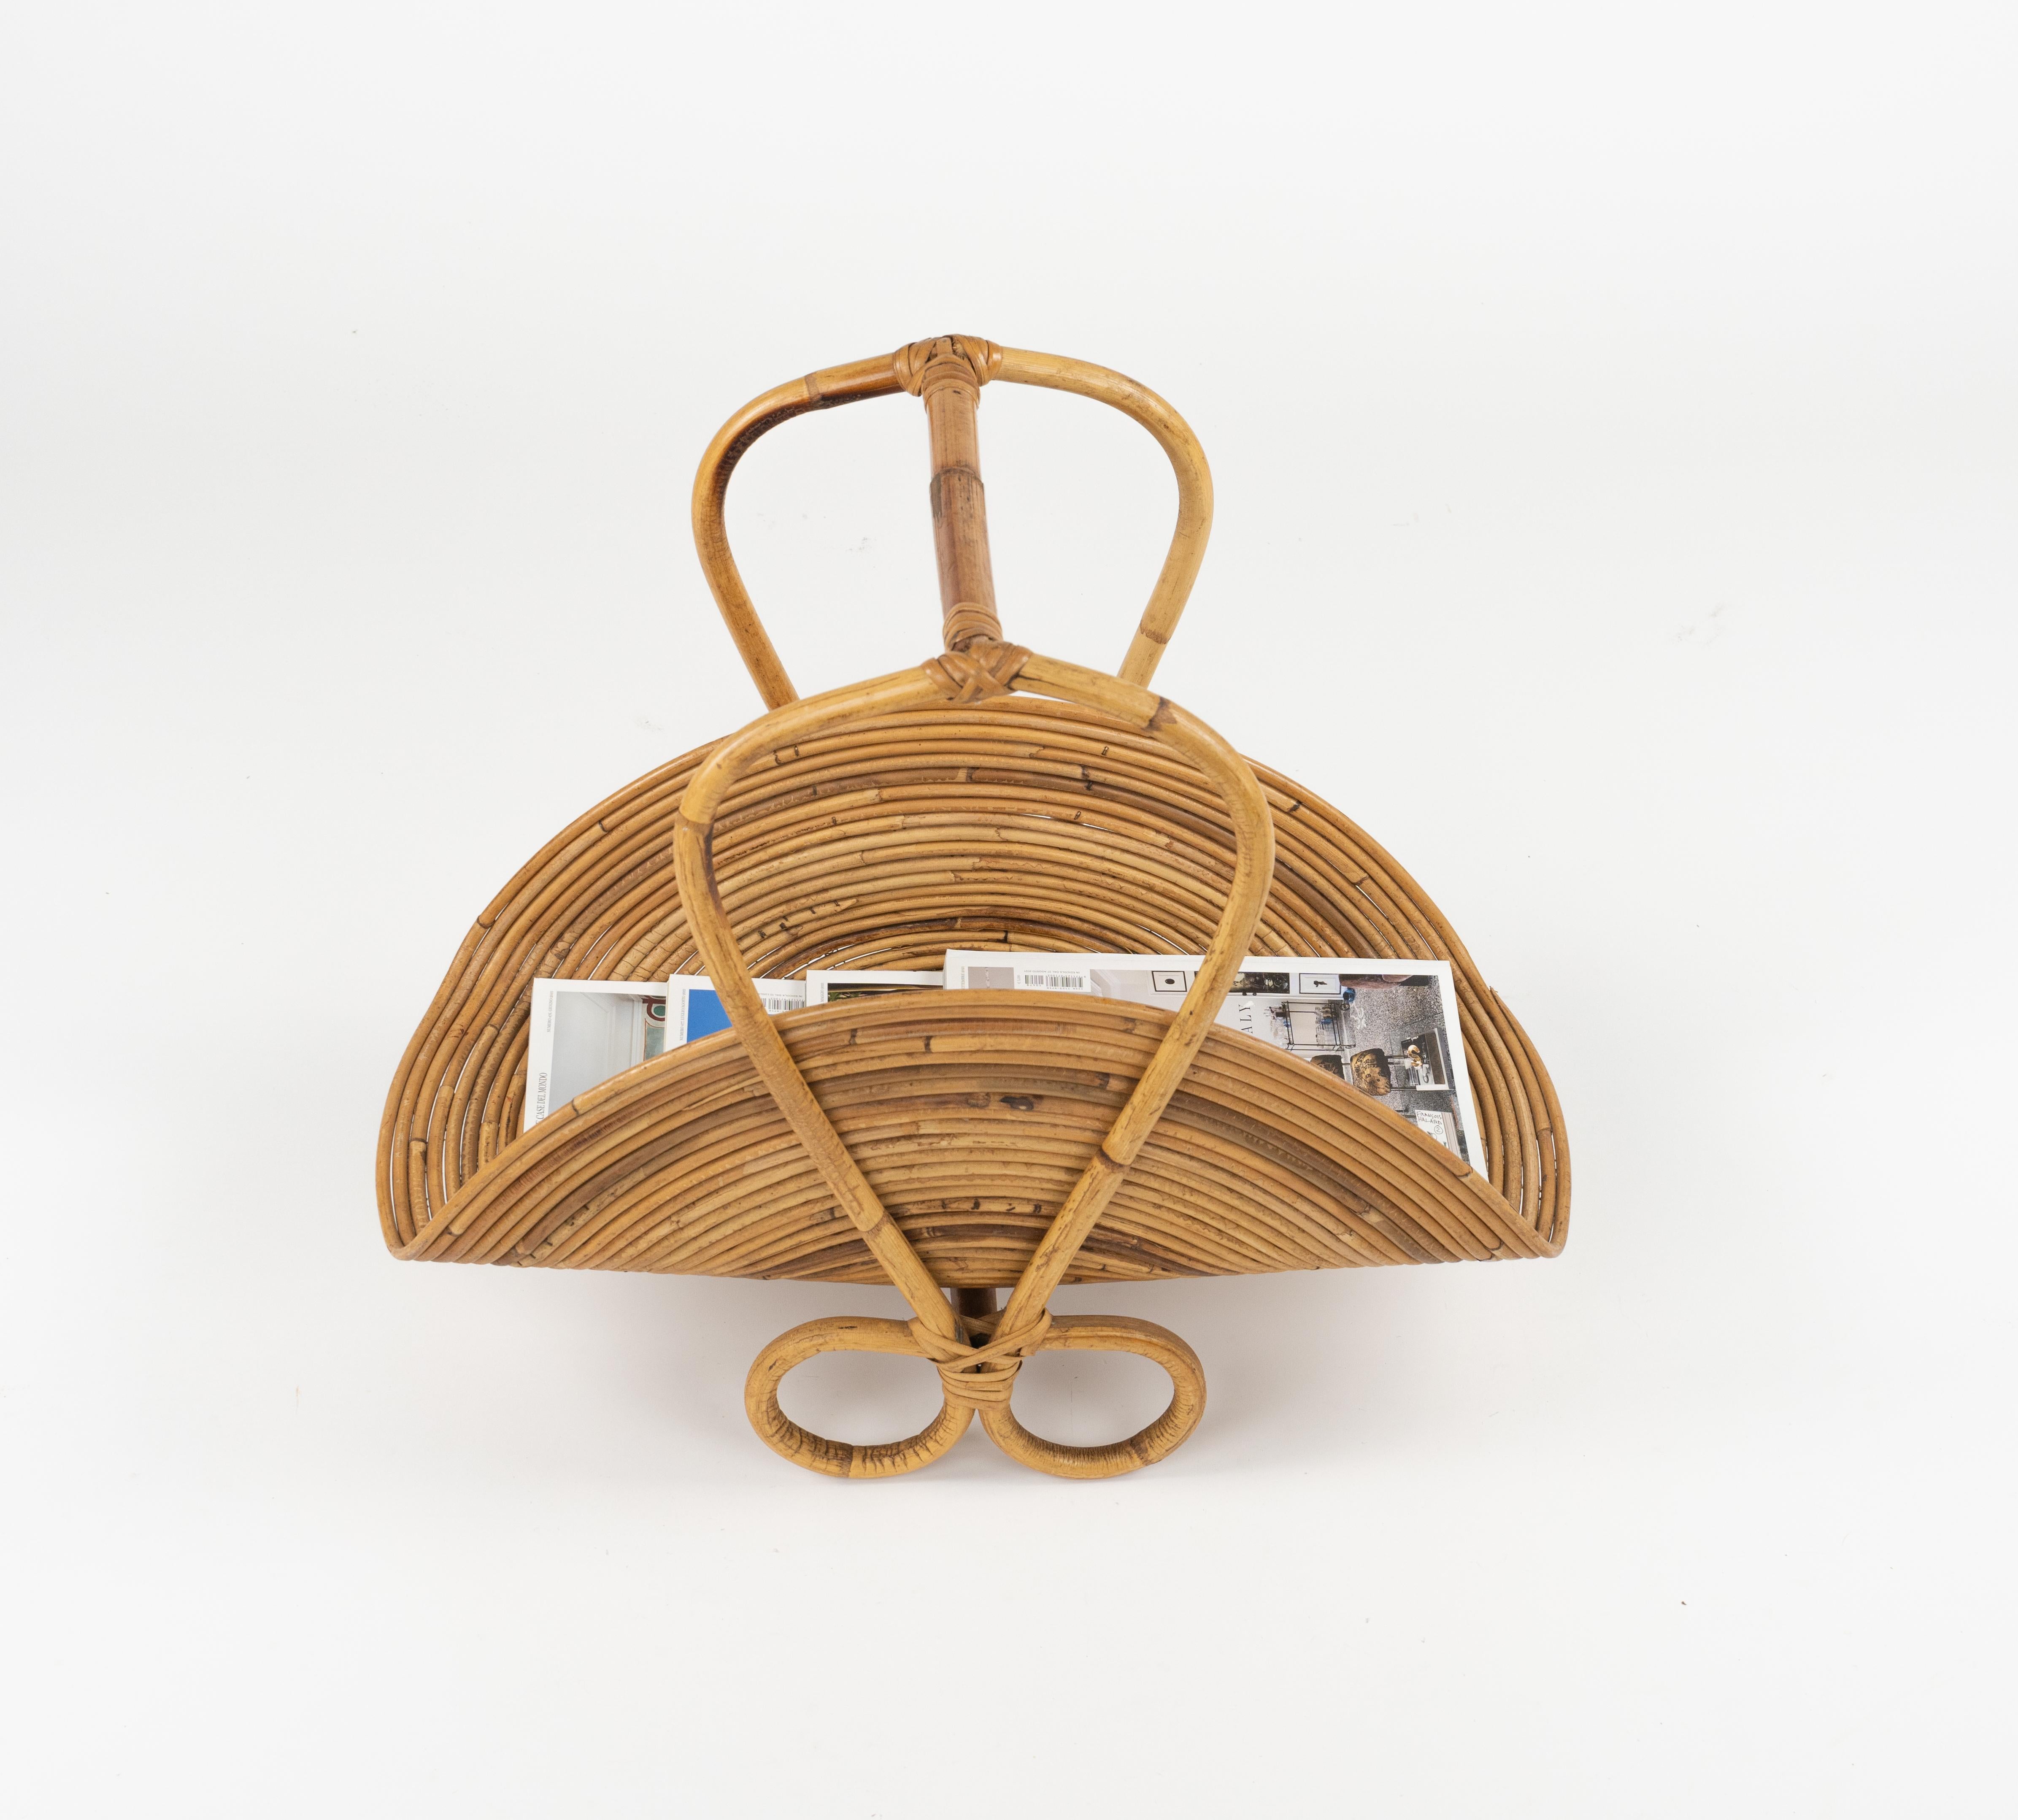 Midcentury Bamboo and Rattan Magazine Rack Vivai Del Sud Style, Italy 1960s For Sale 6